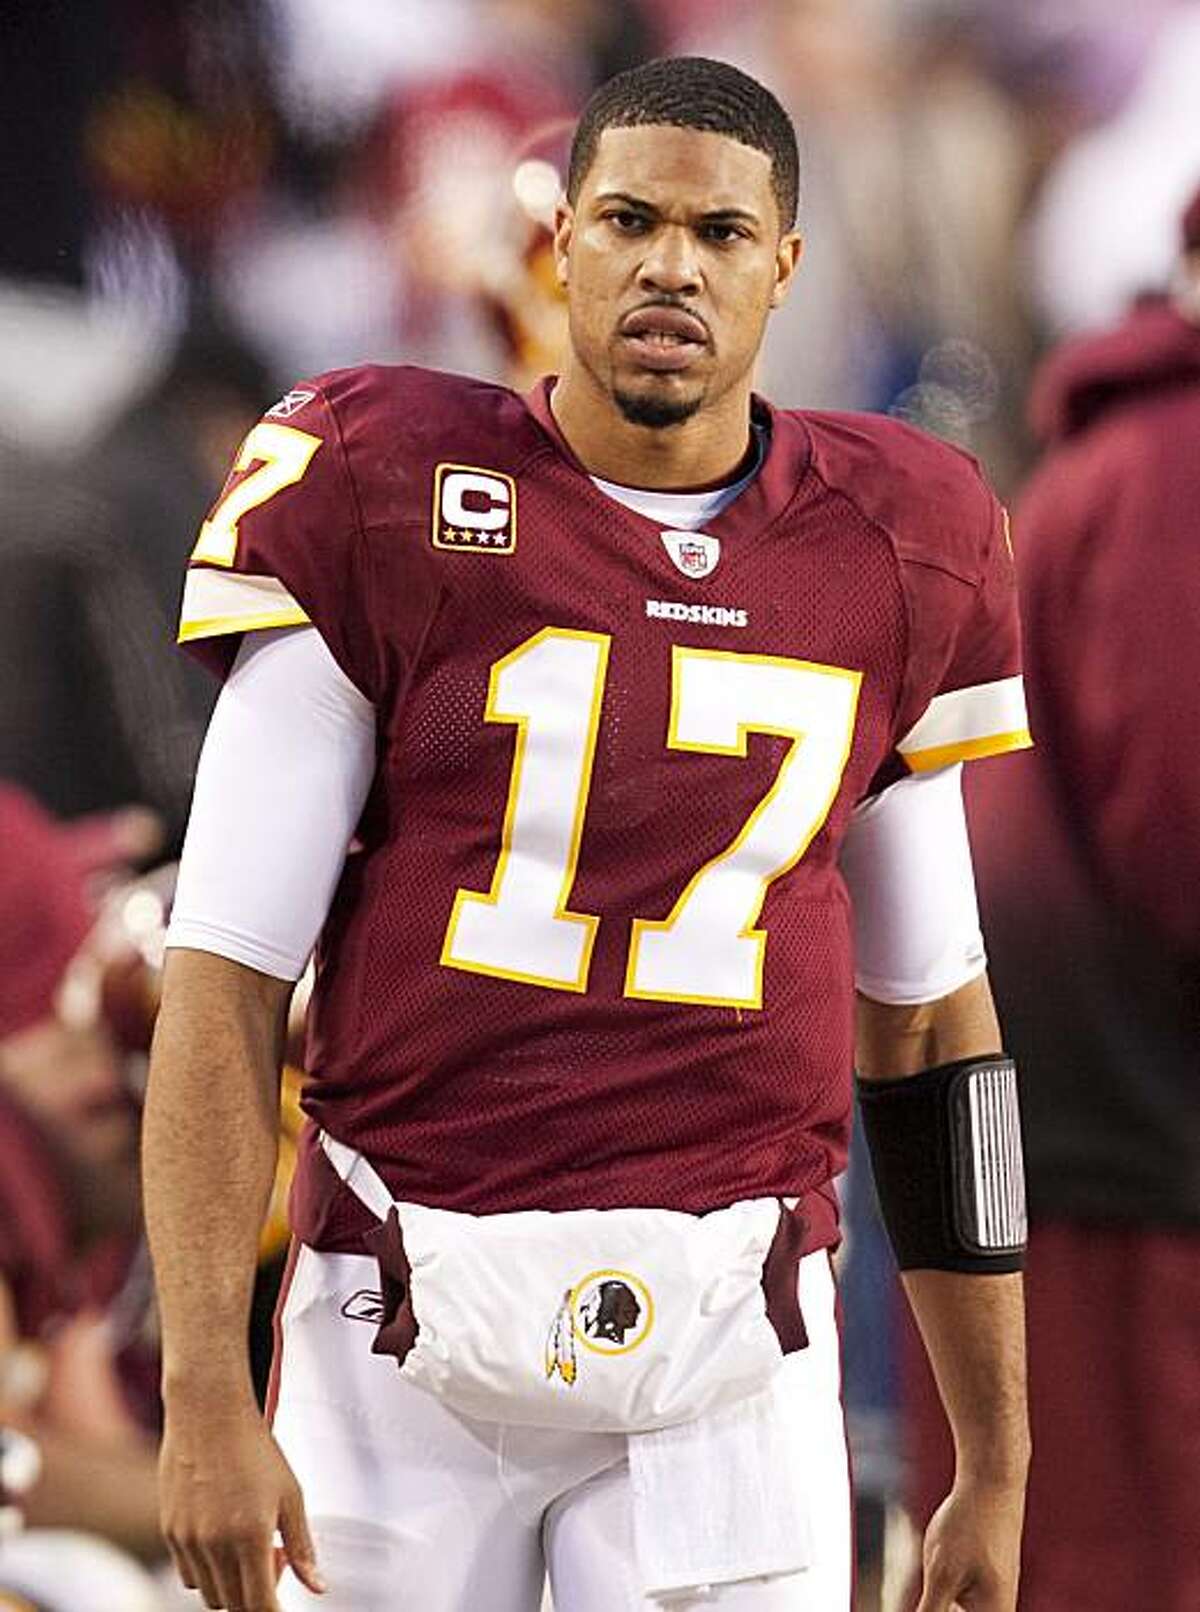 In this file photo from December 2009, Washington Redskins quarterback Jason Campbell (17) walks to the sidelines after being injured at FedEx Field in Landover, Maryland. The Redskins traded Campbell to the Oakland Raiders. (George Bridges/MCT)